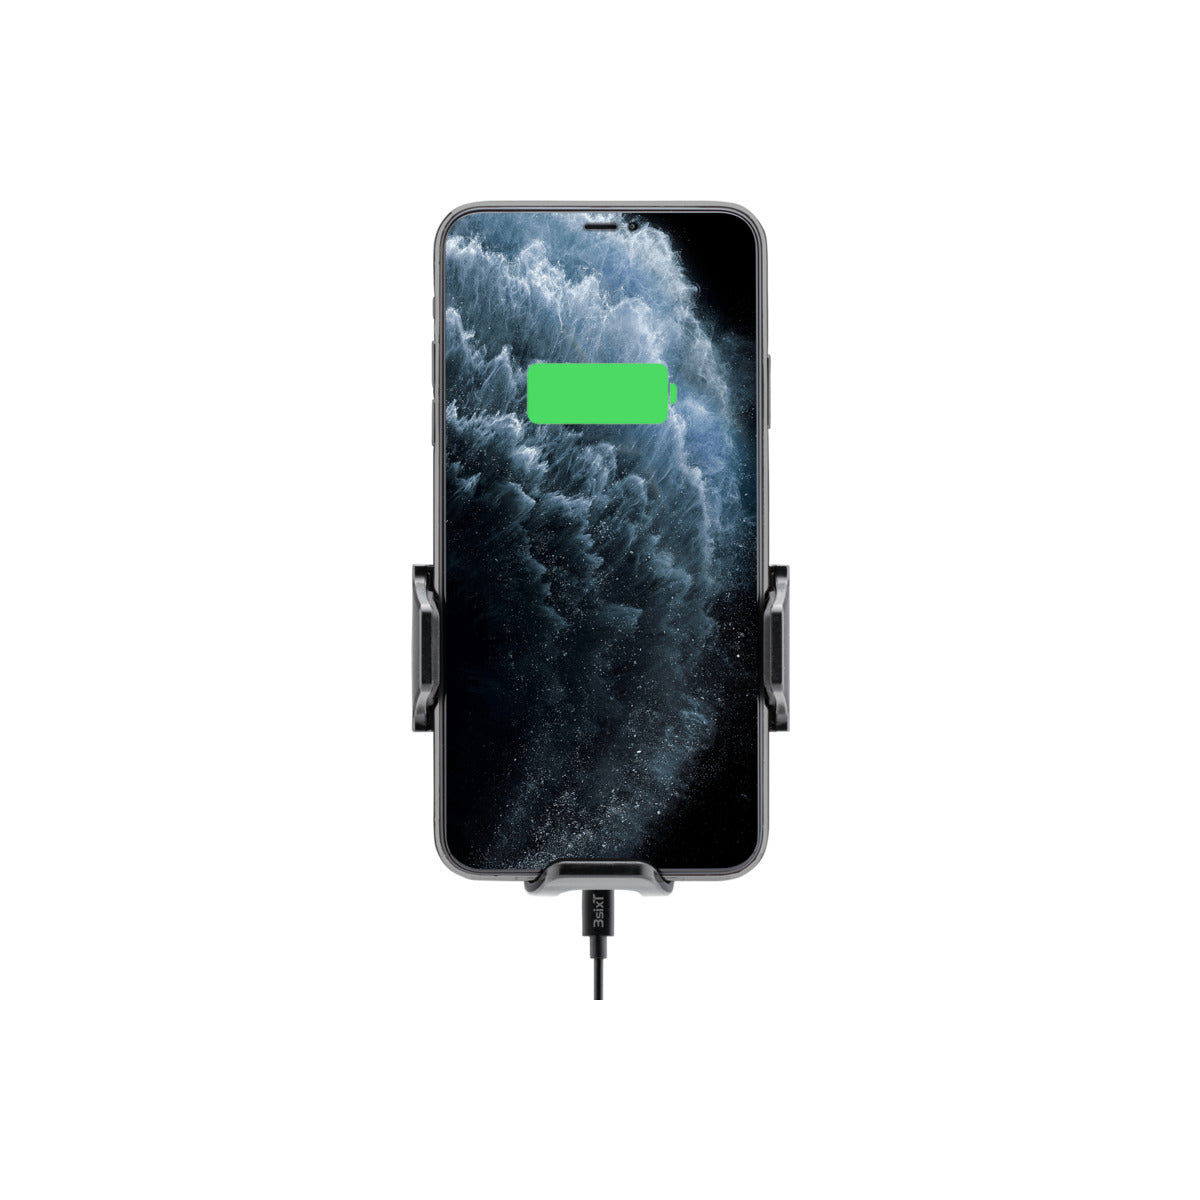 Black Wireless Car Charger Phone Vent Mount, 15W Cell Phone Fast Charging for iPhone and Samsung